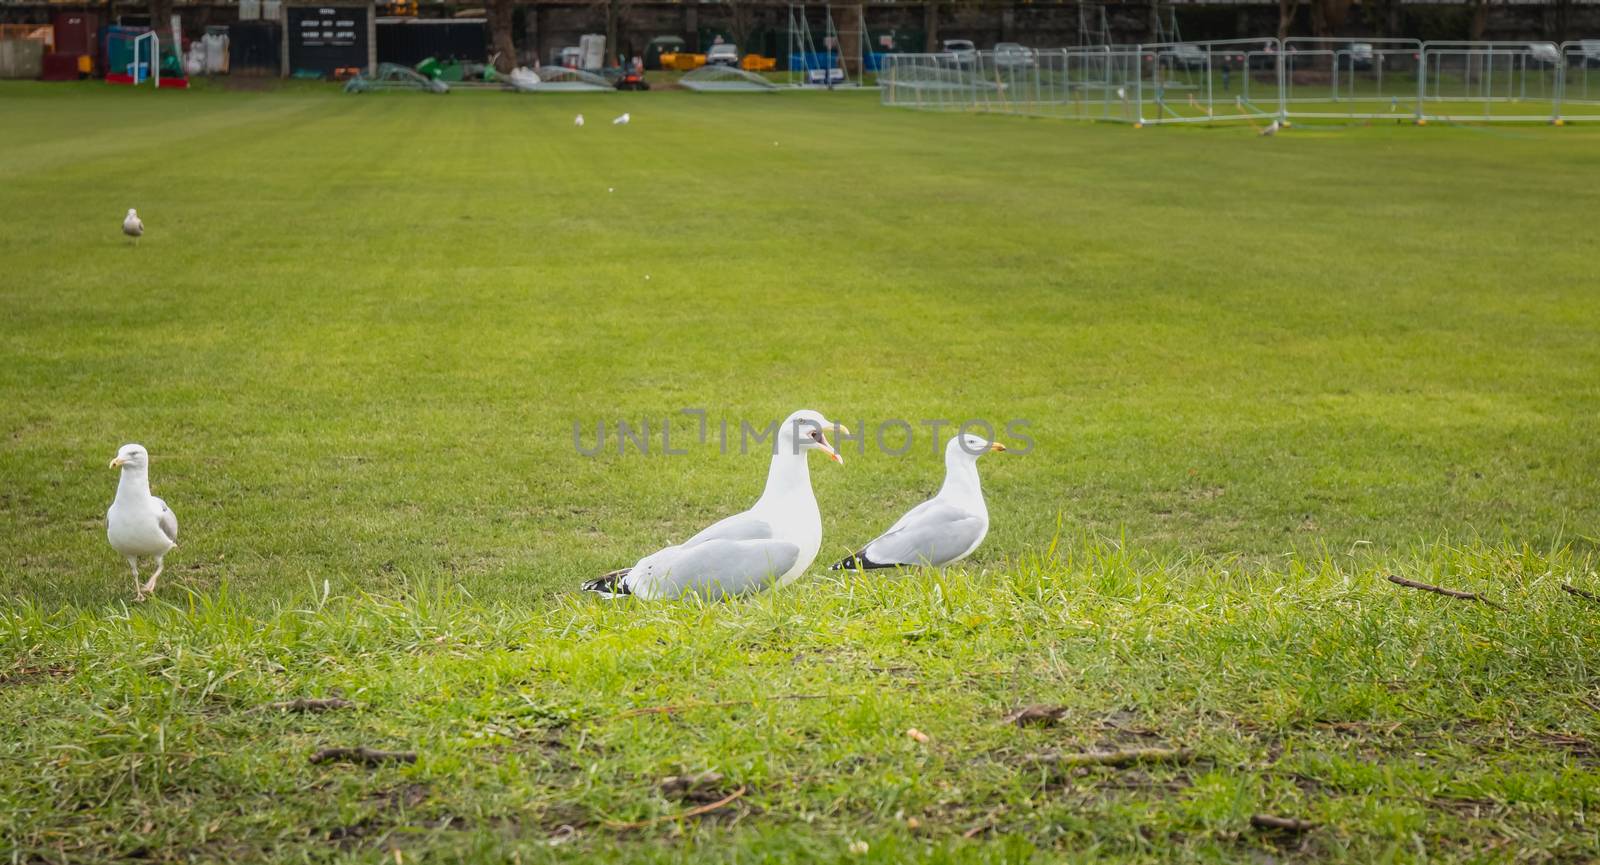 Gulls wandering on the lawn in Dublin, Irland in winter day